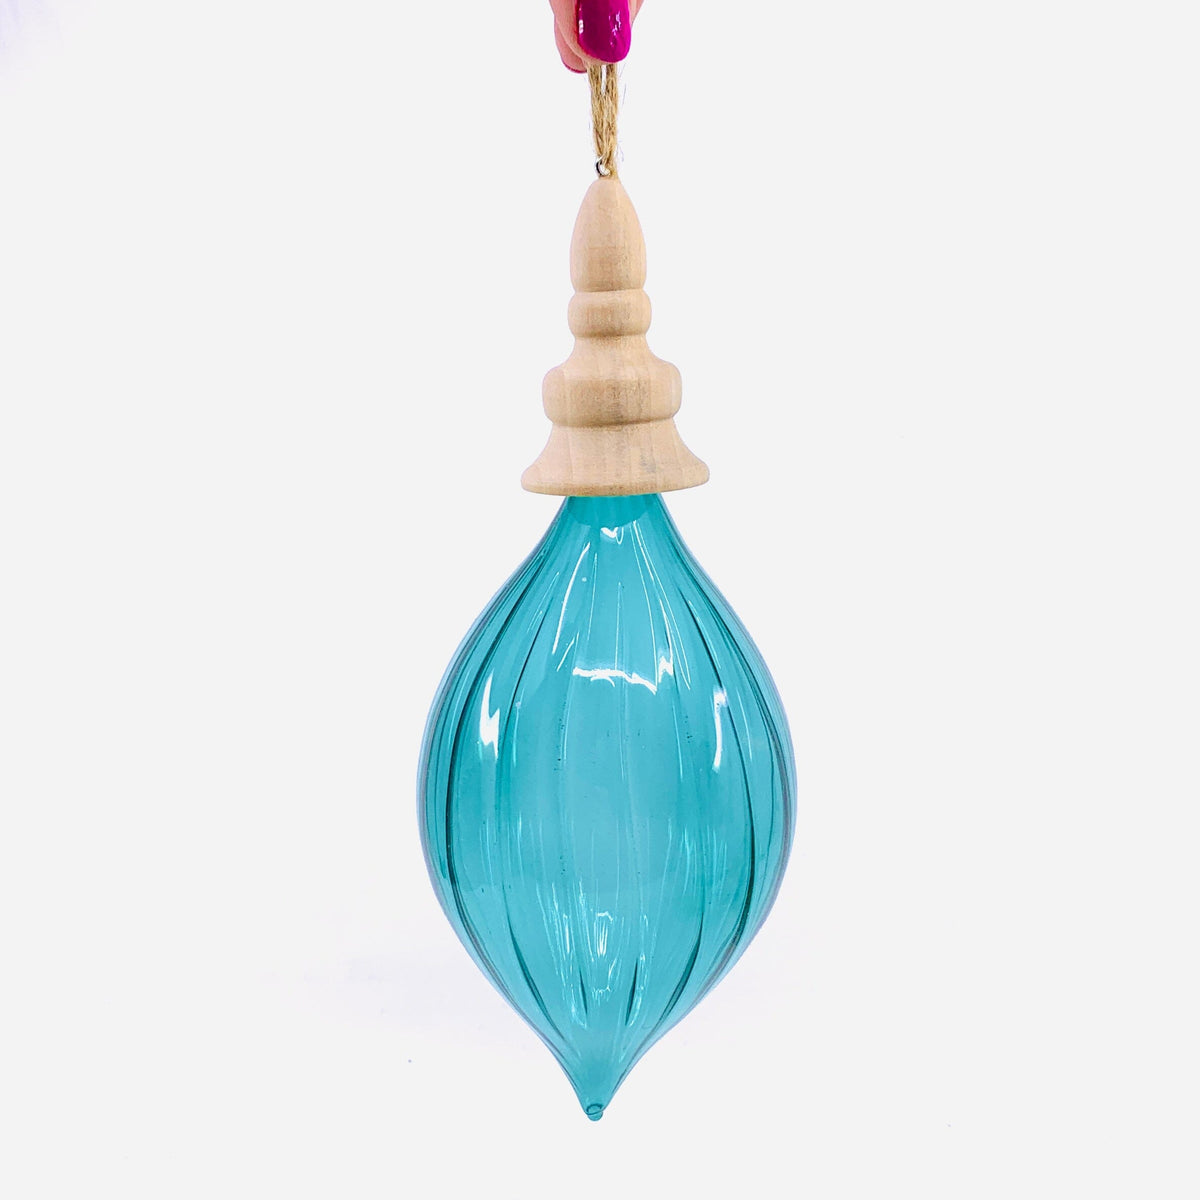 Wooden Spindle Glass Finial Ornament 23, Teal GANZ 